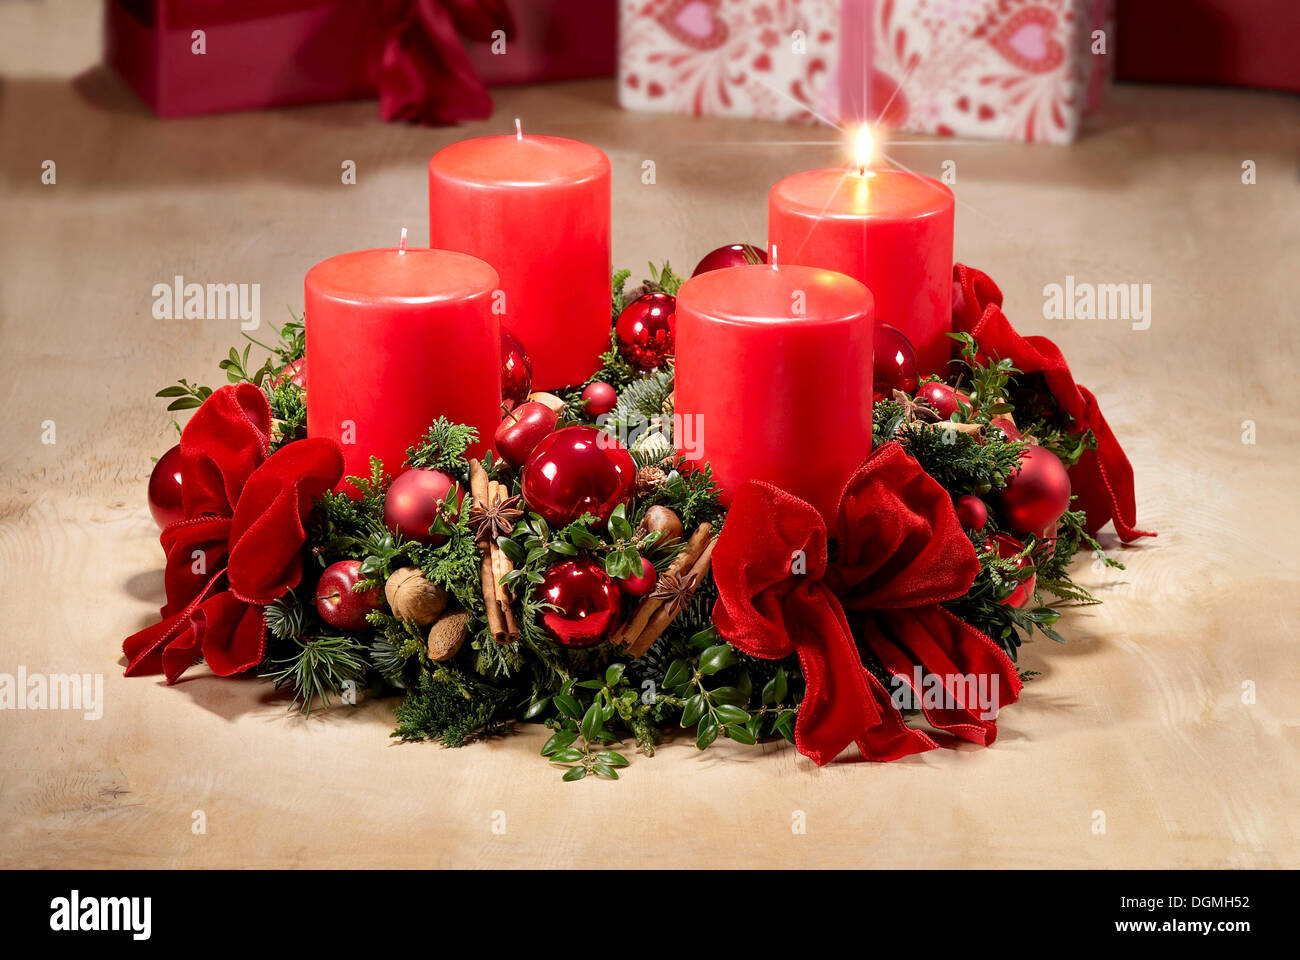 Advent wreath with one candle burning for the first week of Advent Stock Photo